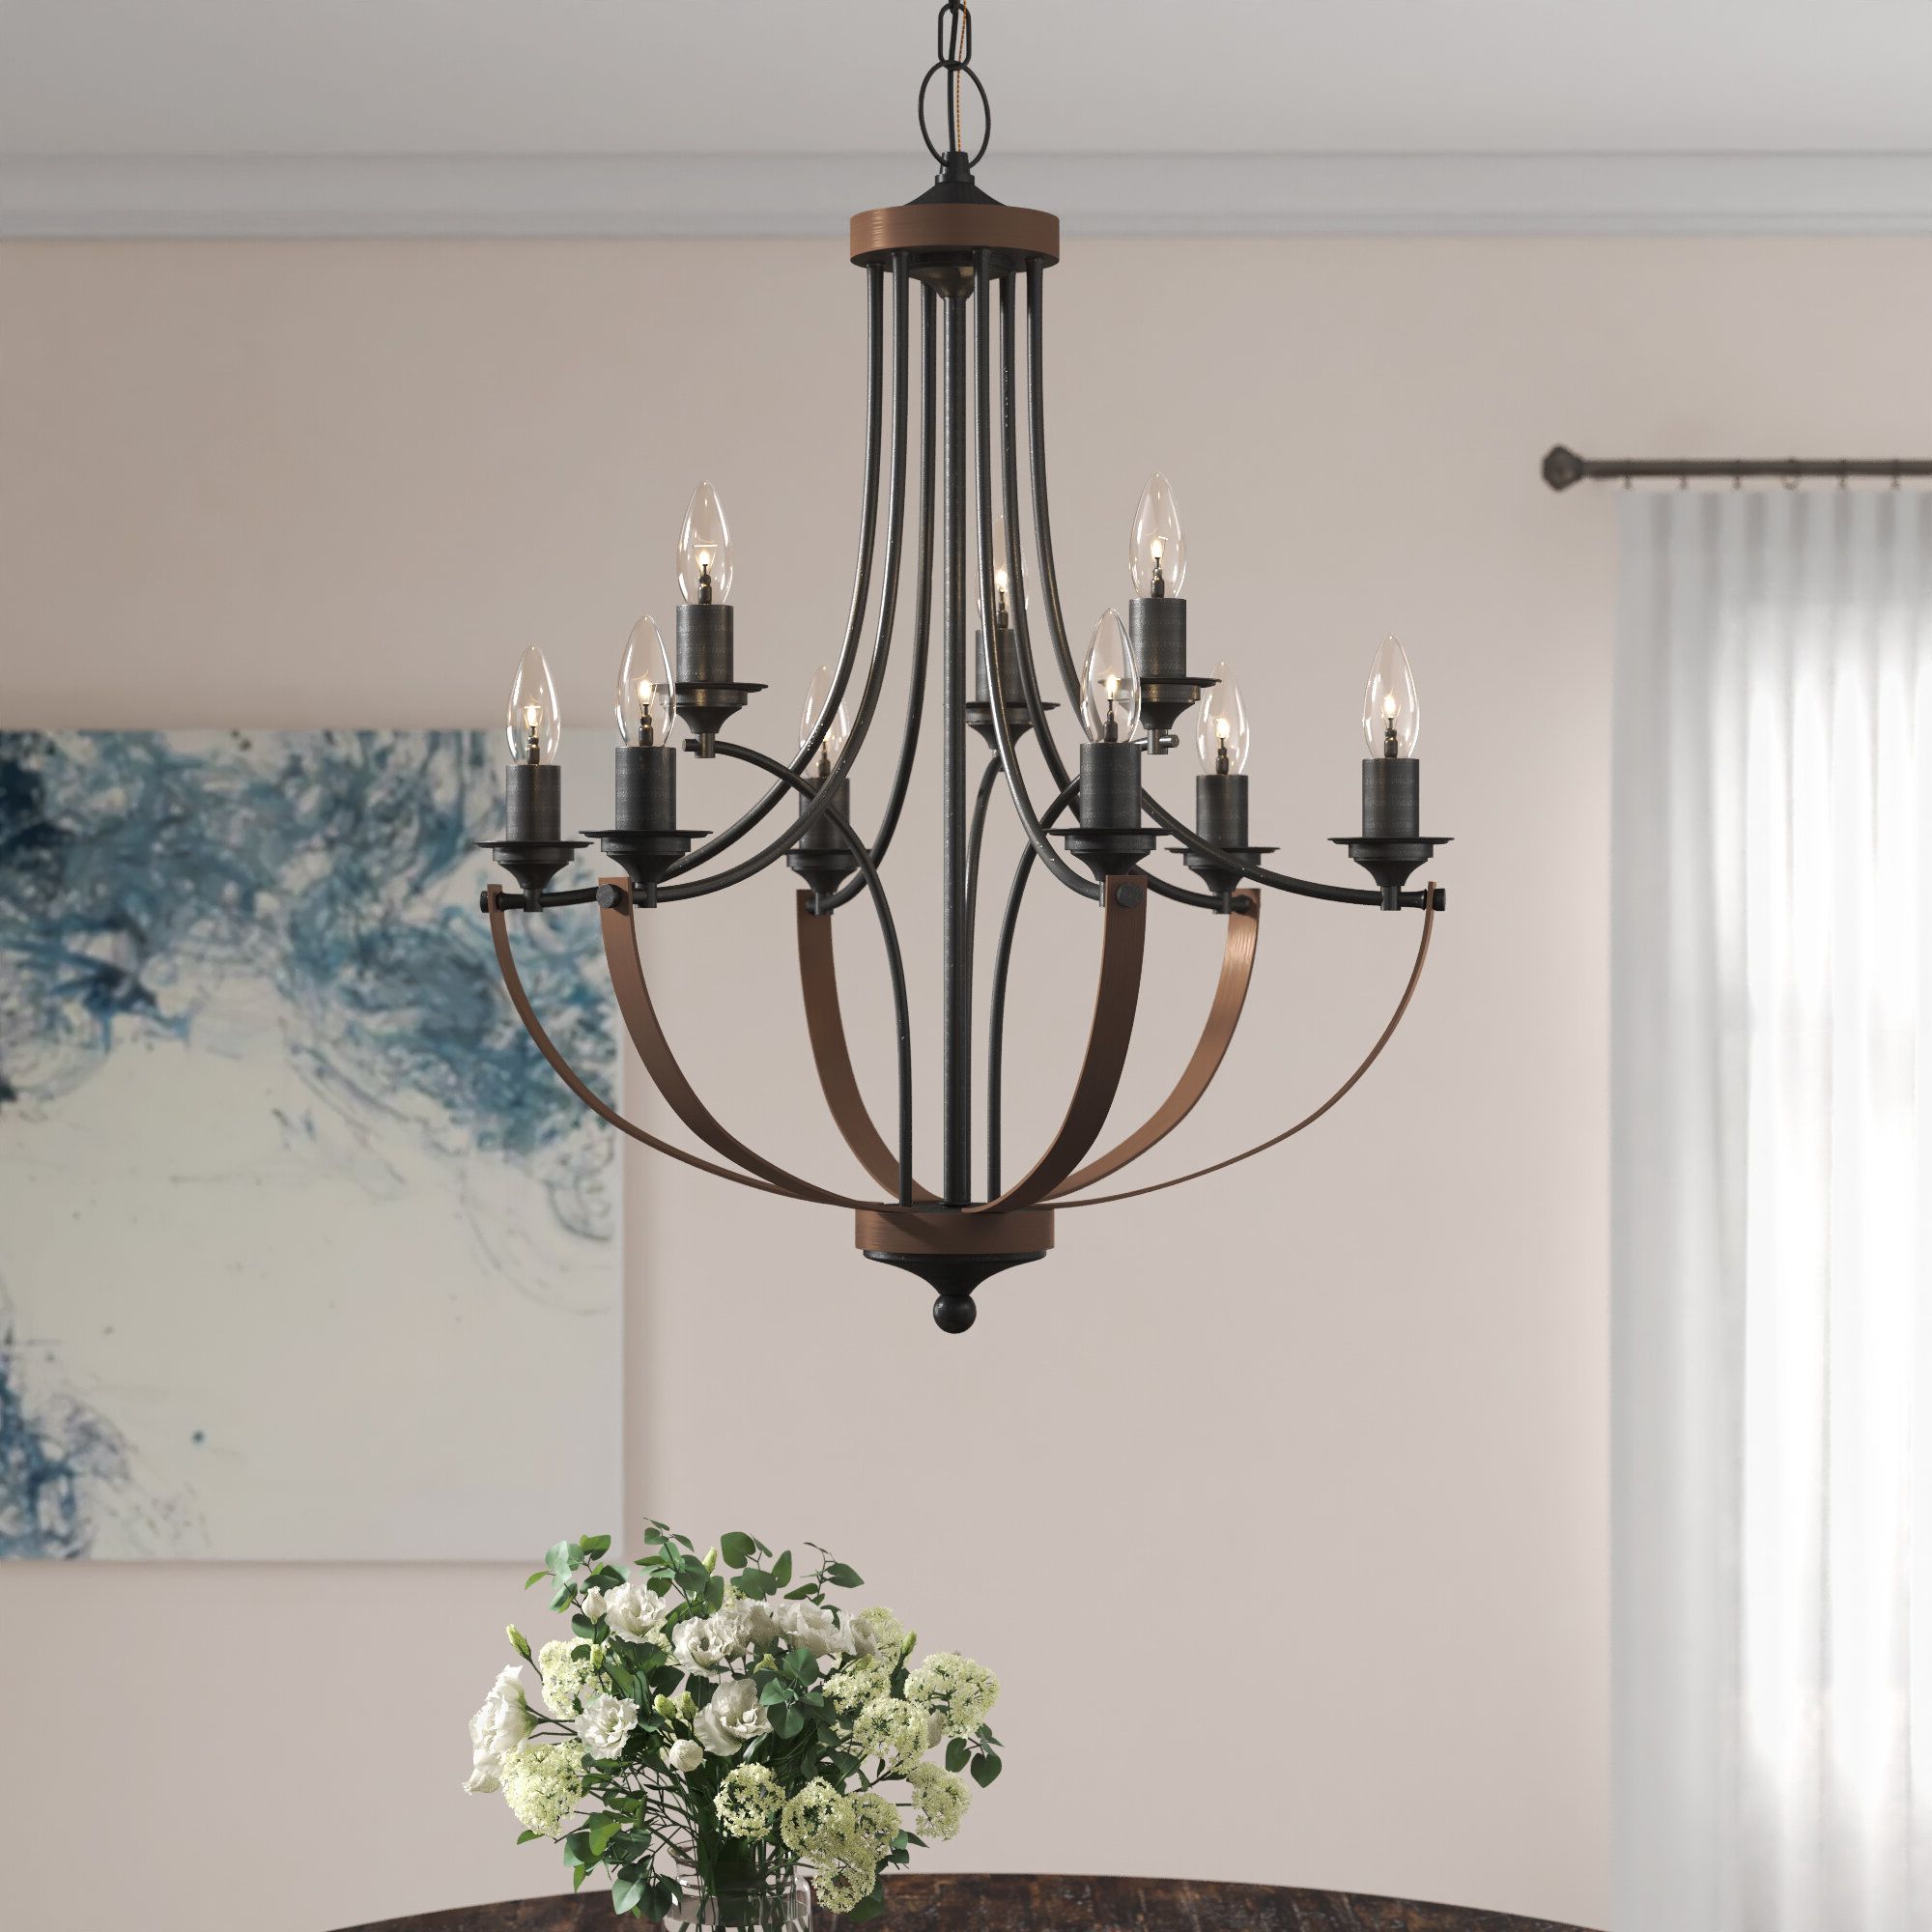 Fashionable Camilla 9 Light Candle Style Chandelier Pertaining To Camilla 9 Light Candle Style Chandeliers (View 1 of 25)